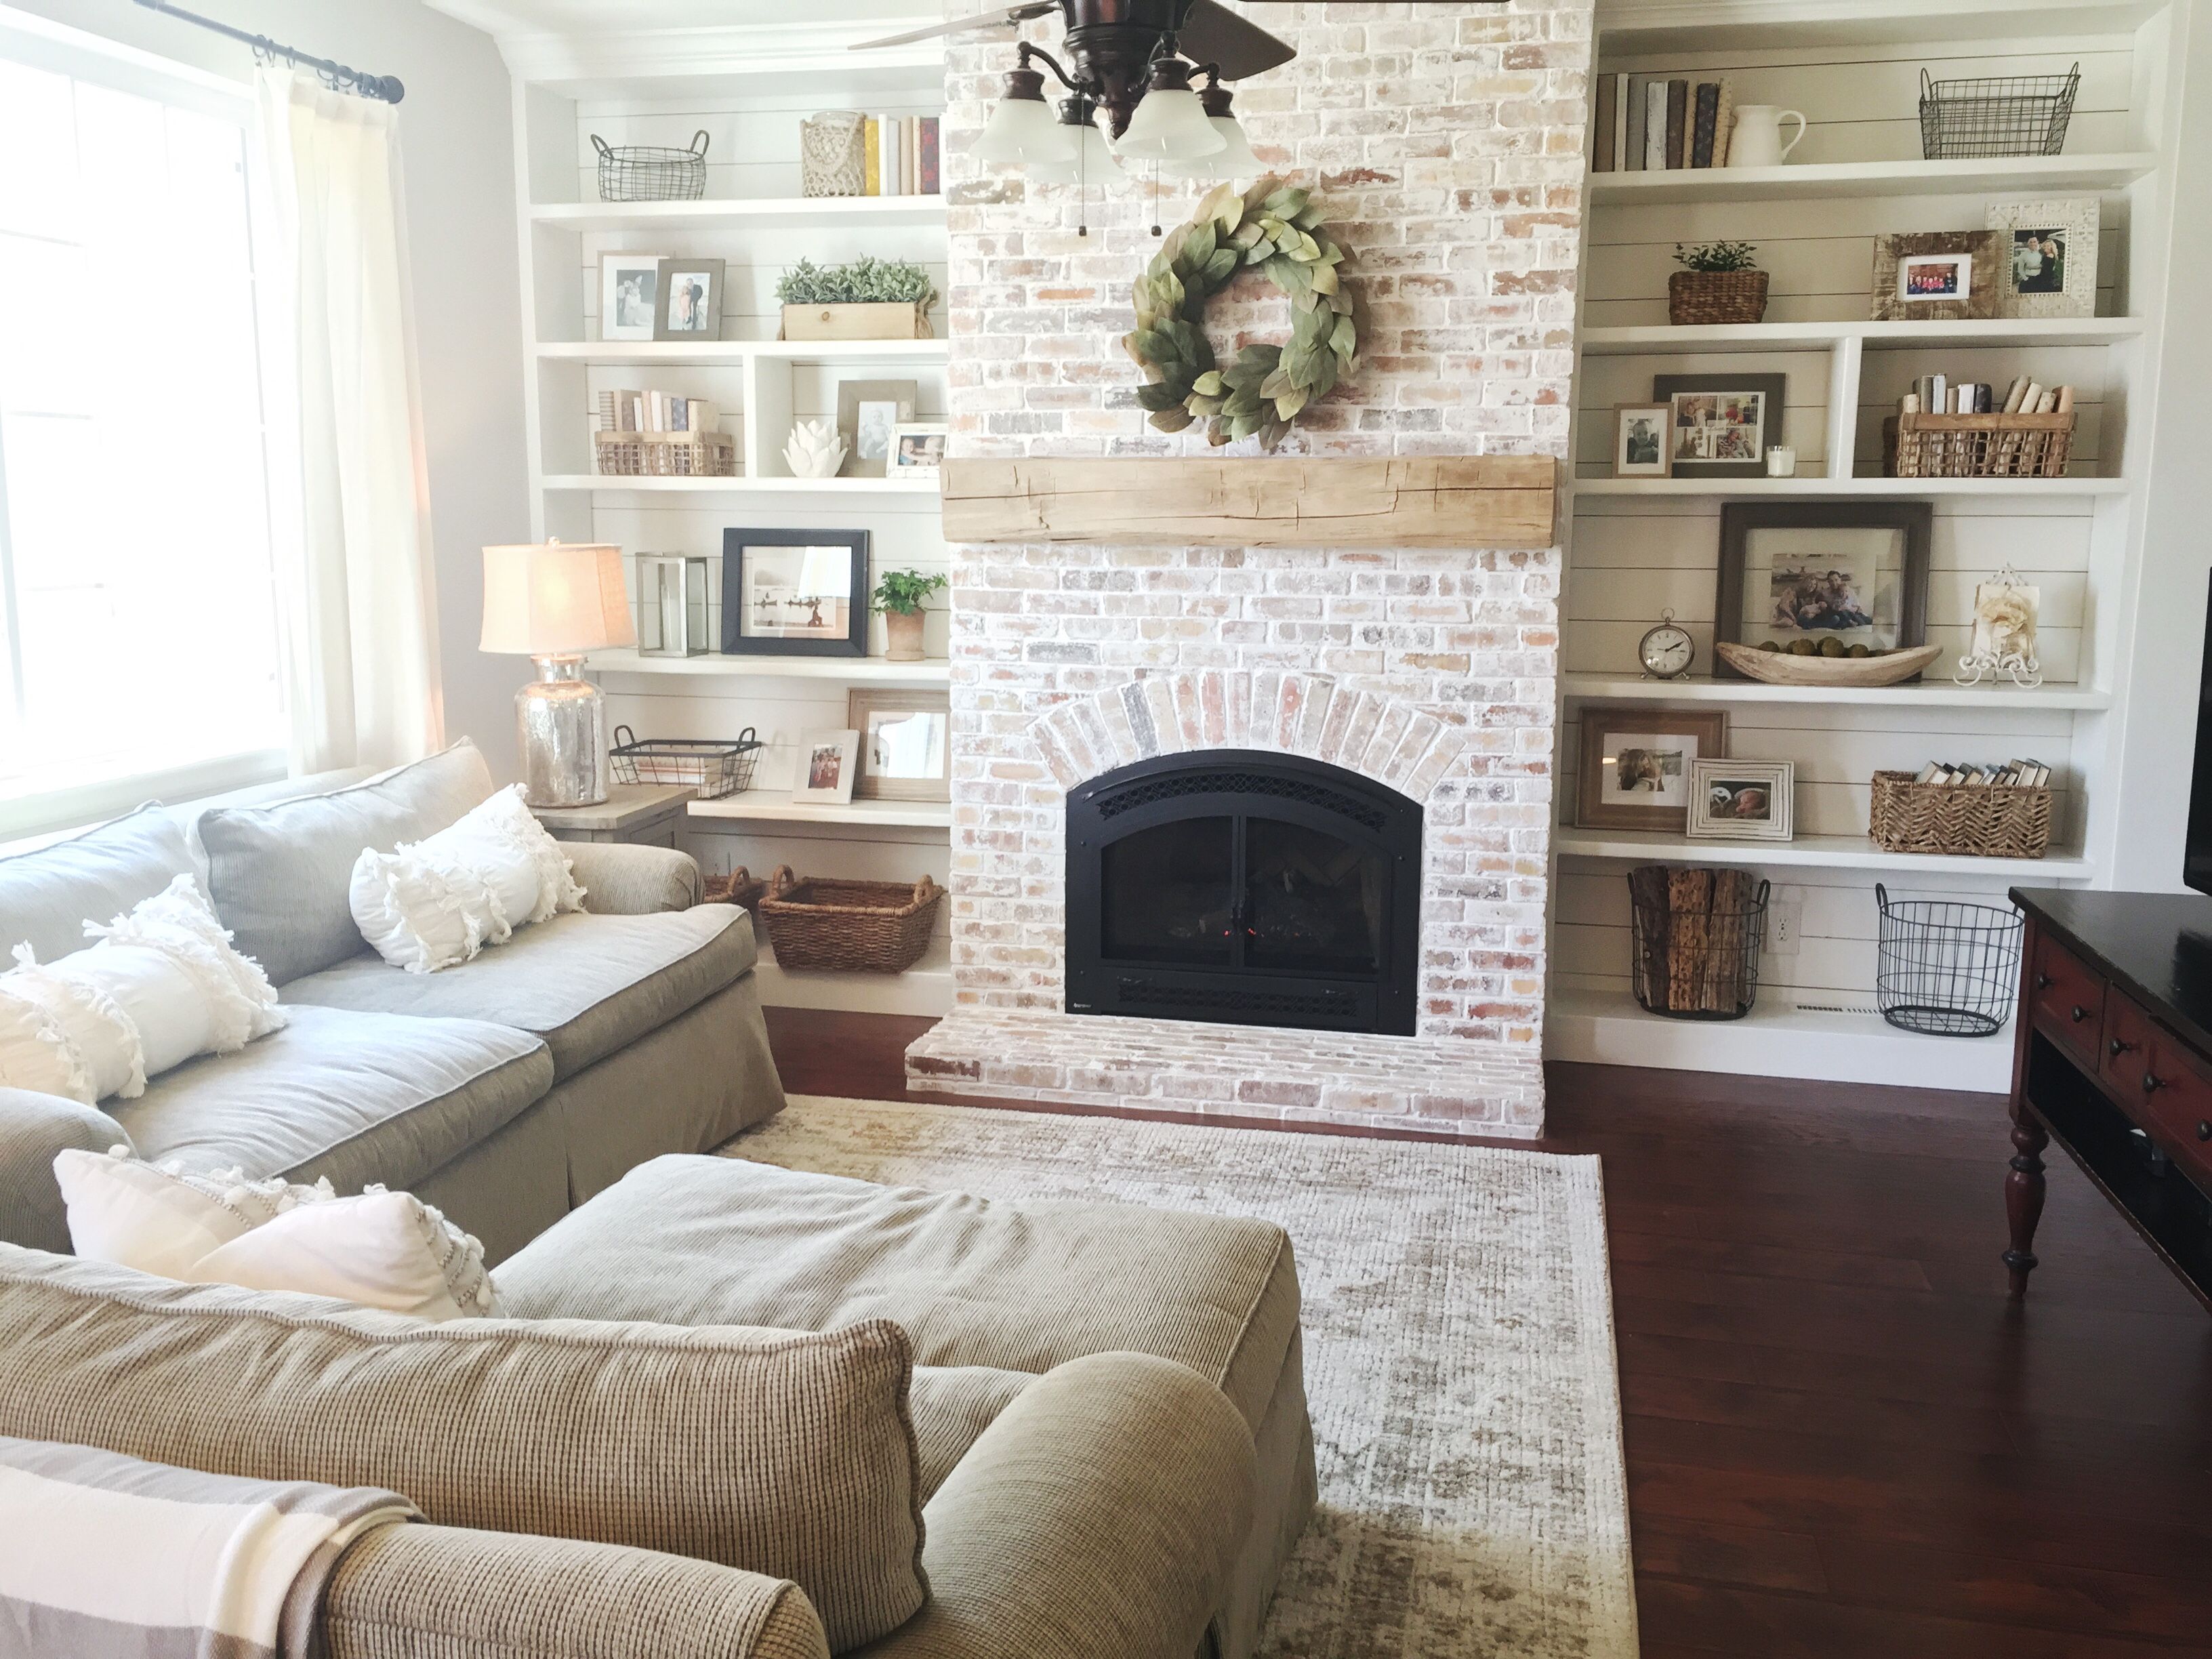 How to Make An Electric Fireplace Look Built In New Built Ins Shiplap Whitewash Brick Fireplace Bookshelf